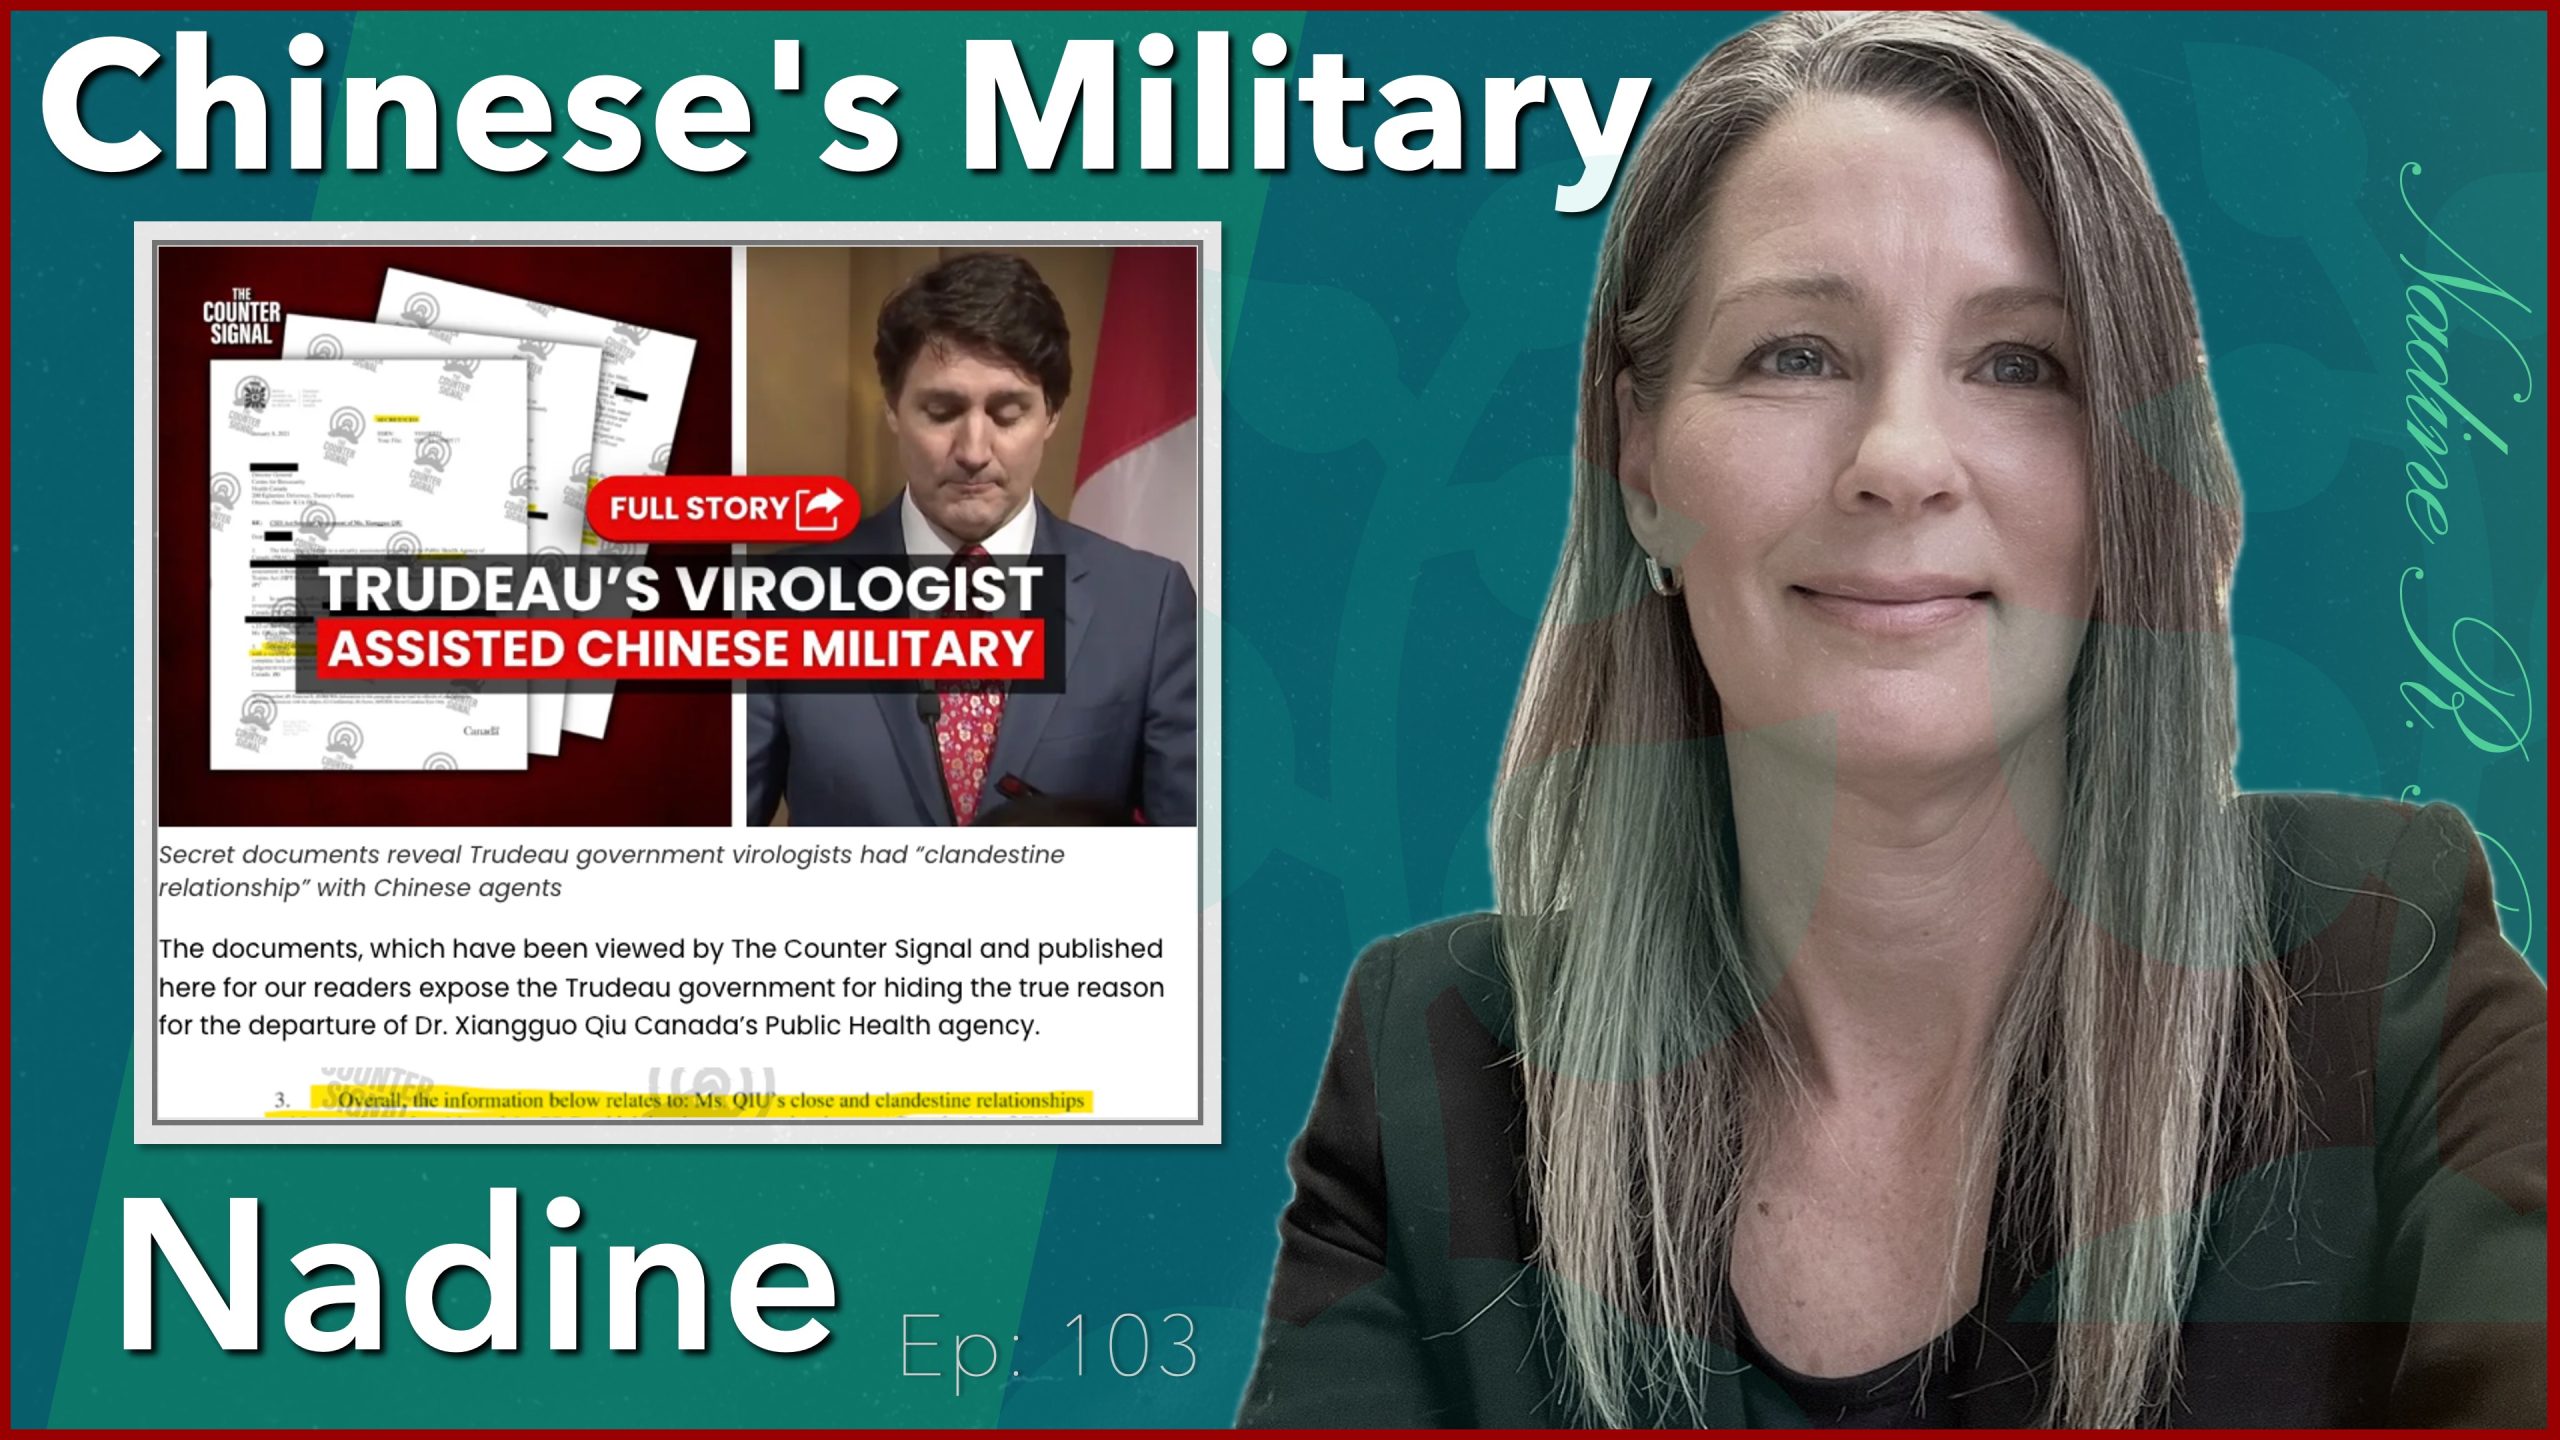 Nadine with Chinese Military and Justin Trudeau YouTube Thumbnail